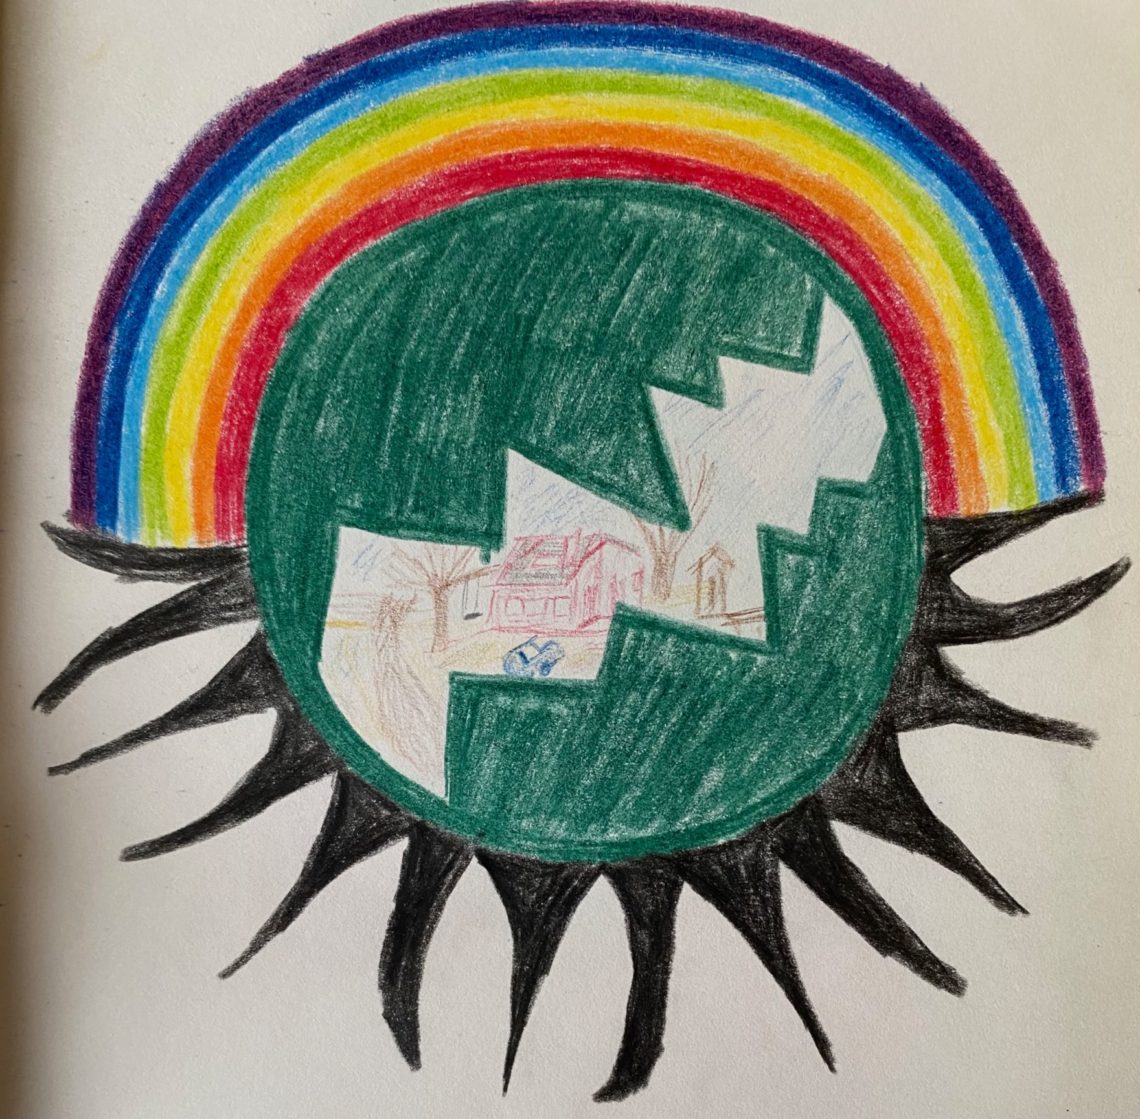 Hand-drawn colorful rainbow with some jagged edges underneath; one of the drawing I made while feeling homesick in Copenhagen